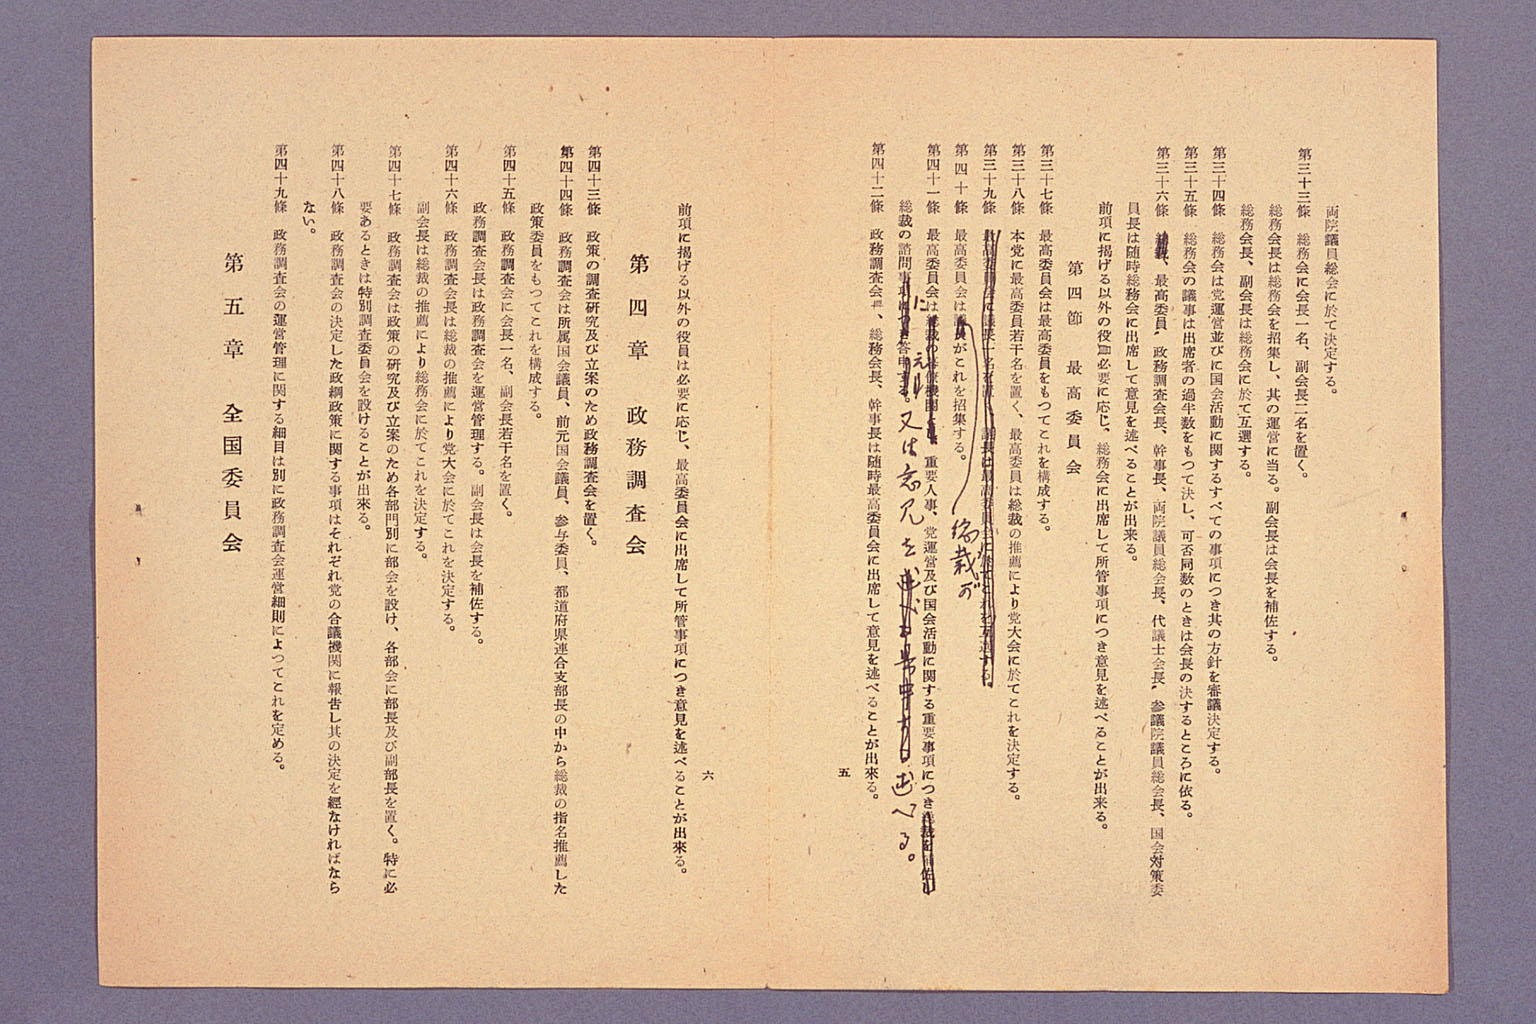 Party rules and codes for Japan Democratic Party (draft) (larger)